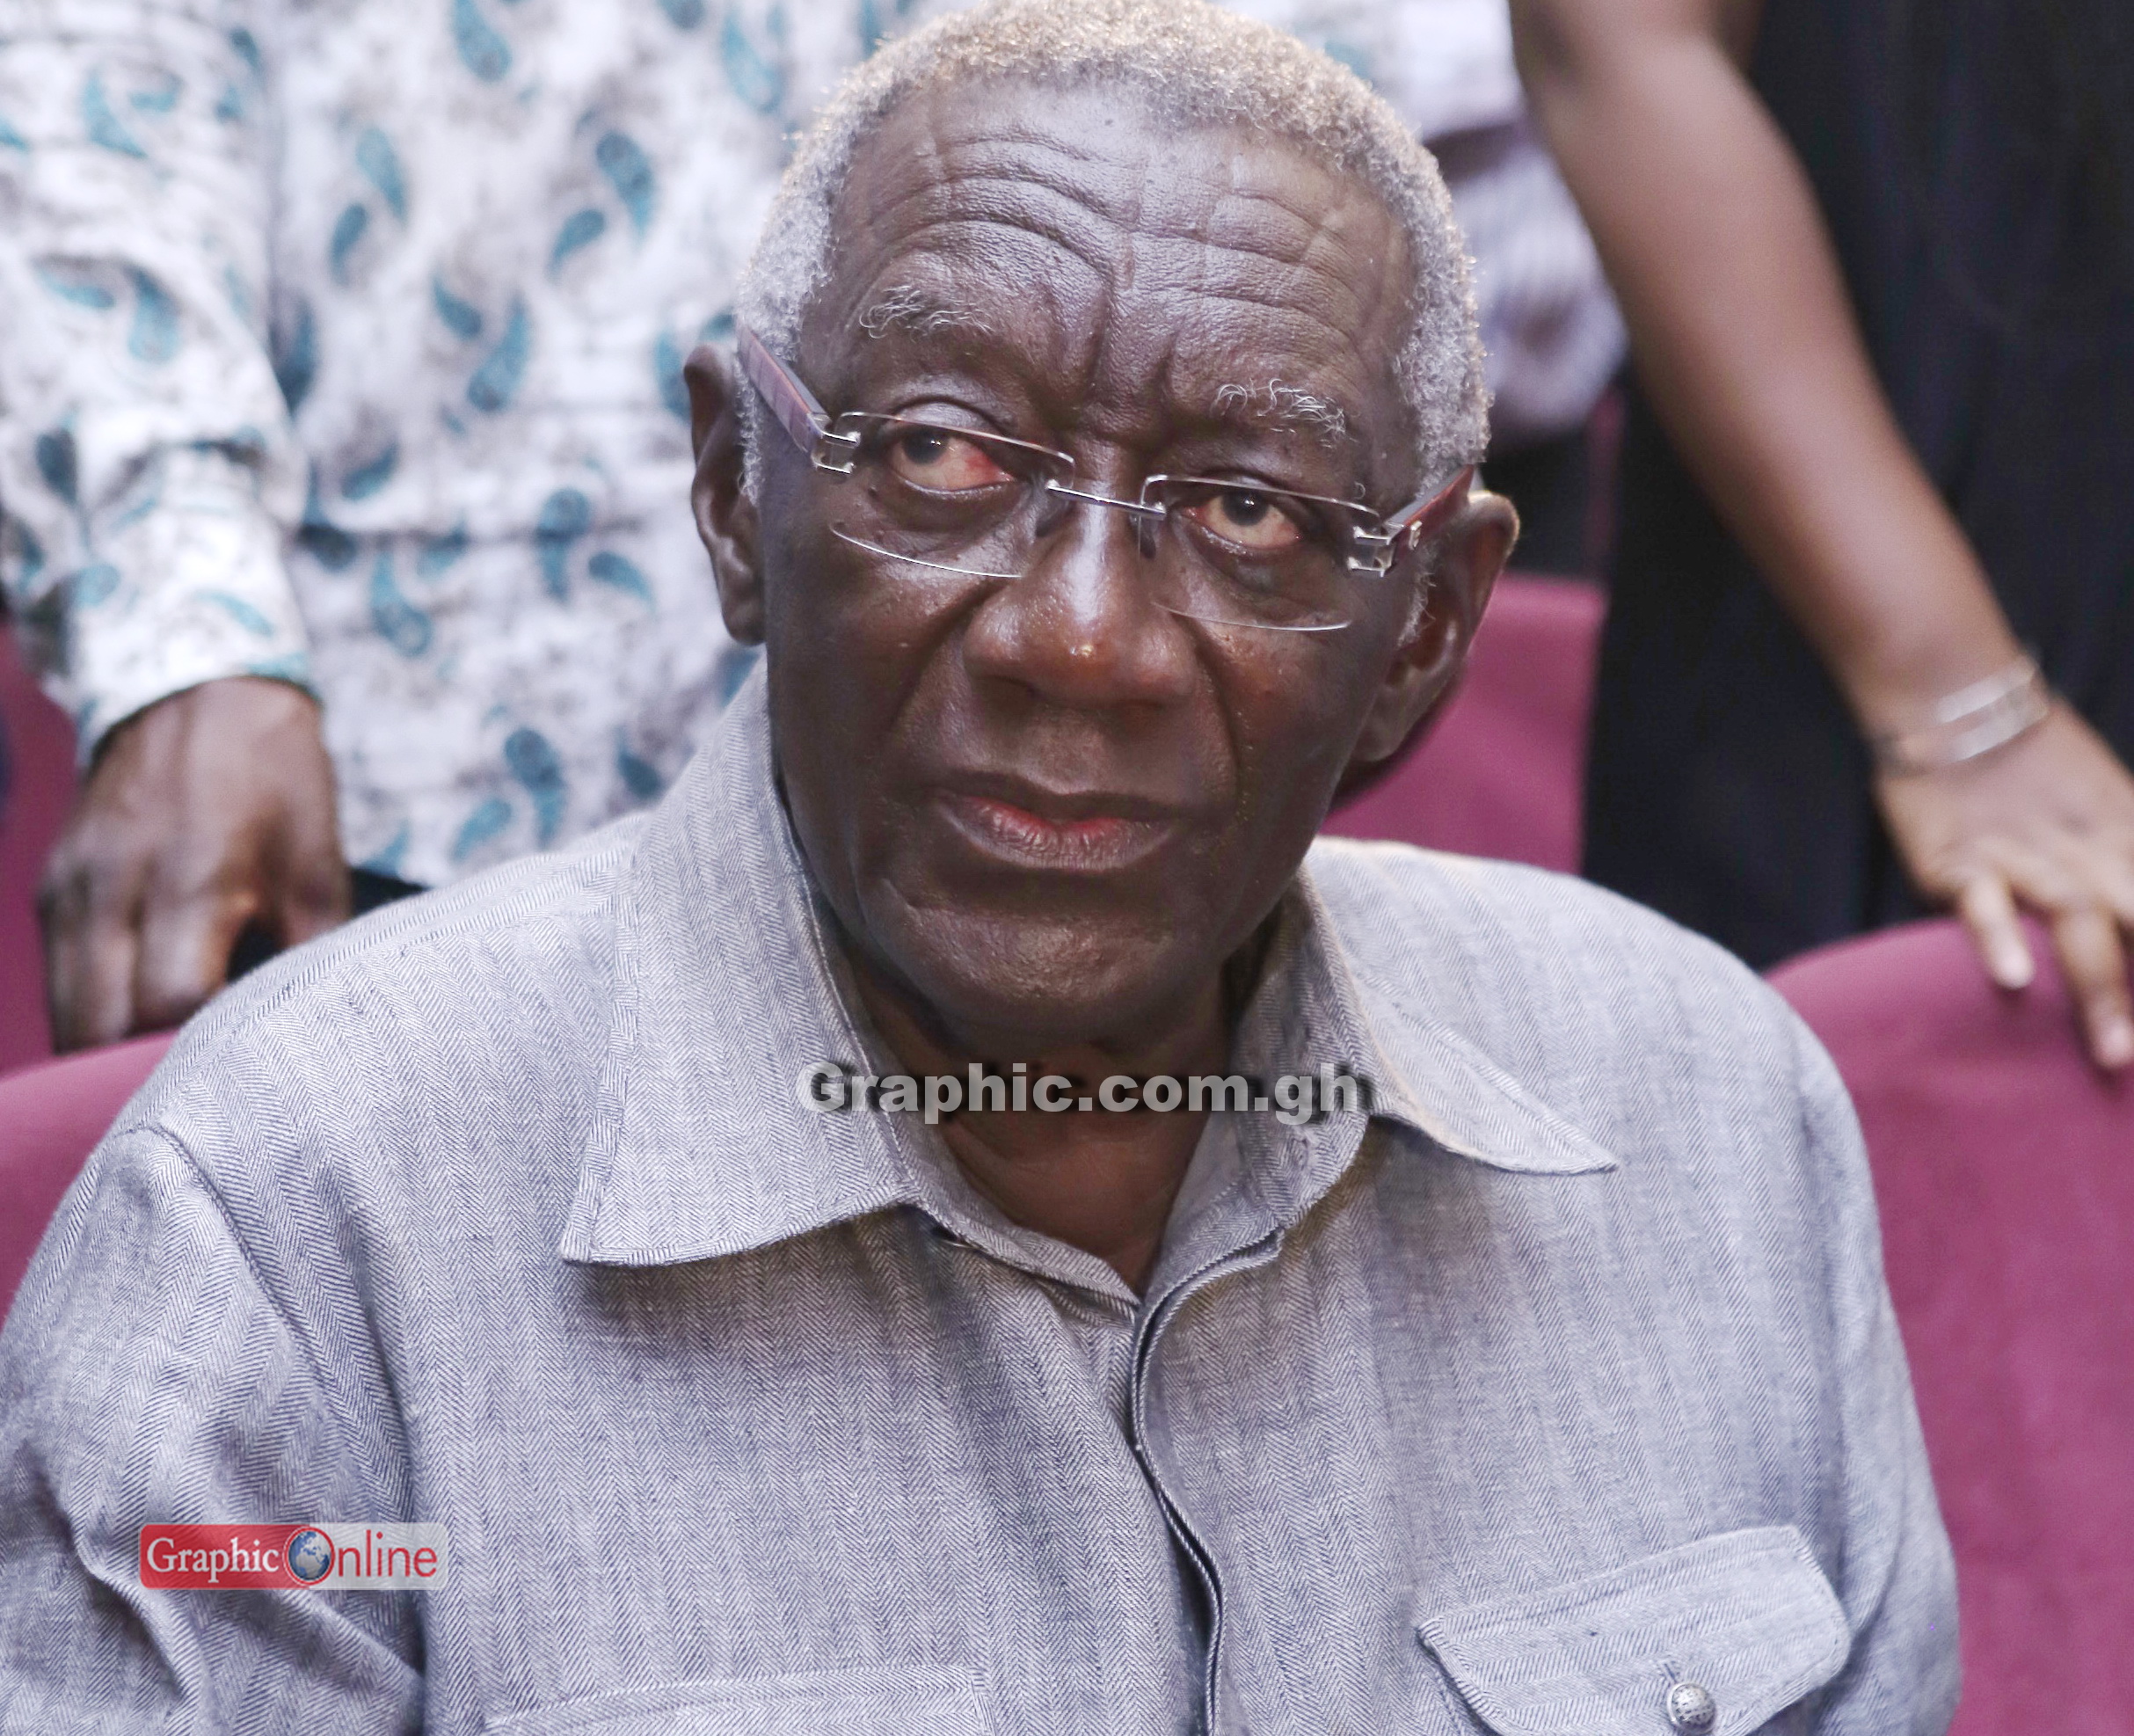 Former President Kufuor not related to UK cocaine suspect Felicia Kufuor